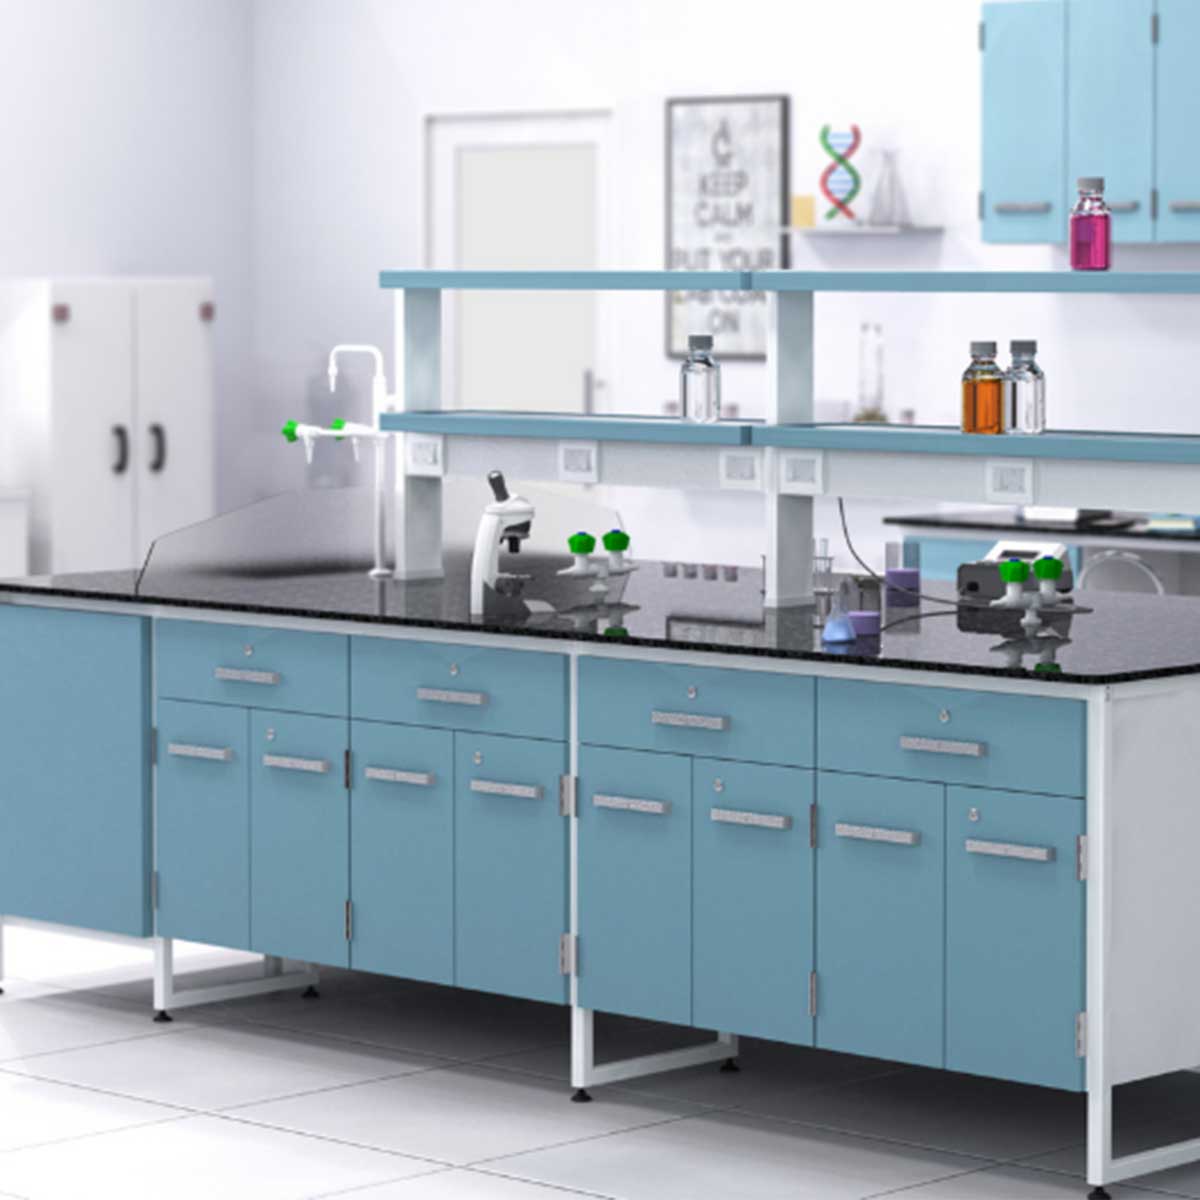 Laboratory Workstation Manufacturers, Suppliers in Delhi Cantonment